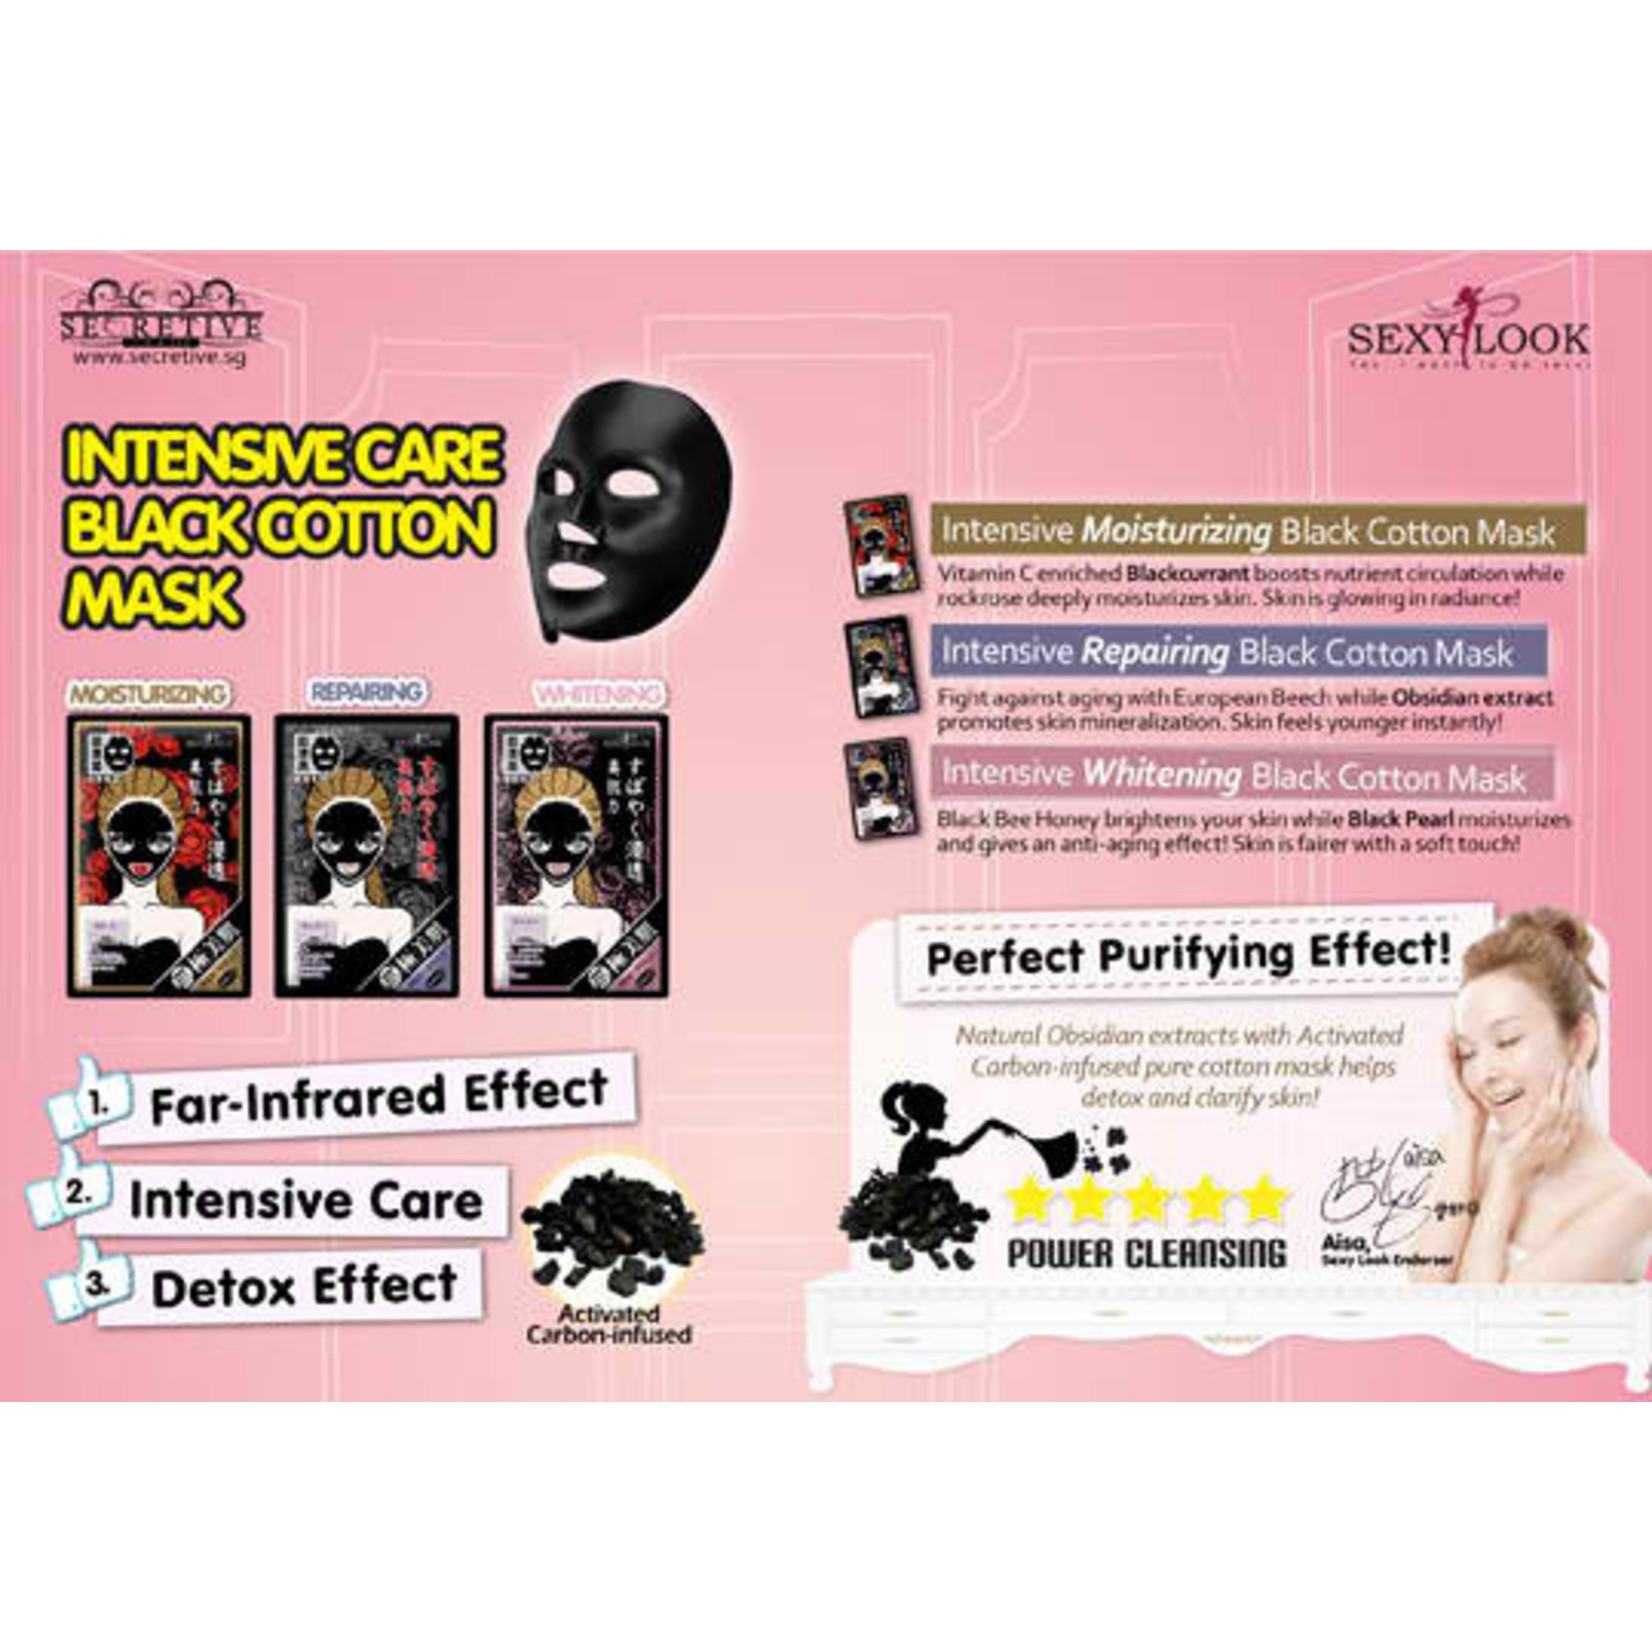 SEXYLOOK Intensive Hydrating Black Mask